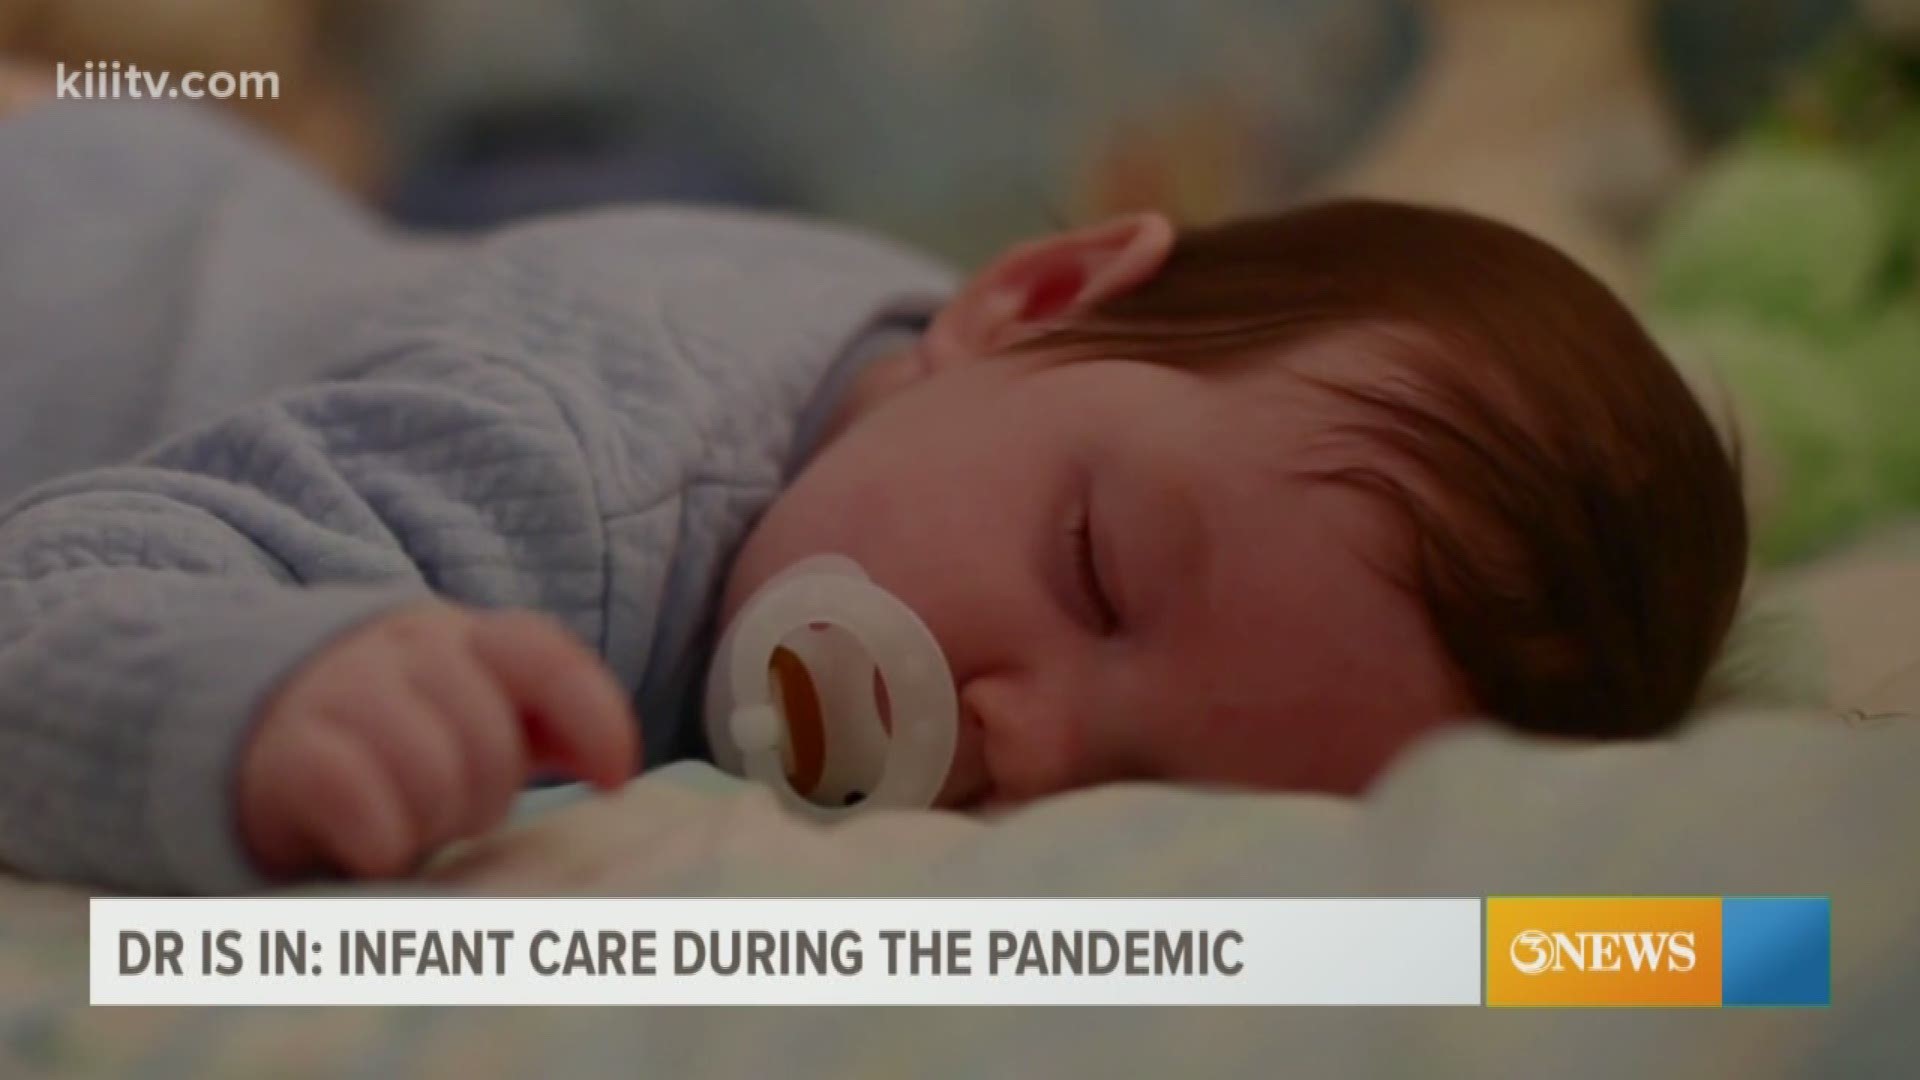 Bringing Home A Newborn Baby During A Pandemic